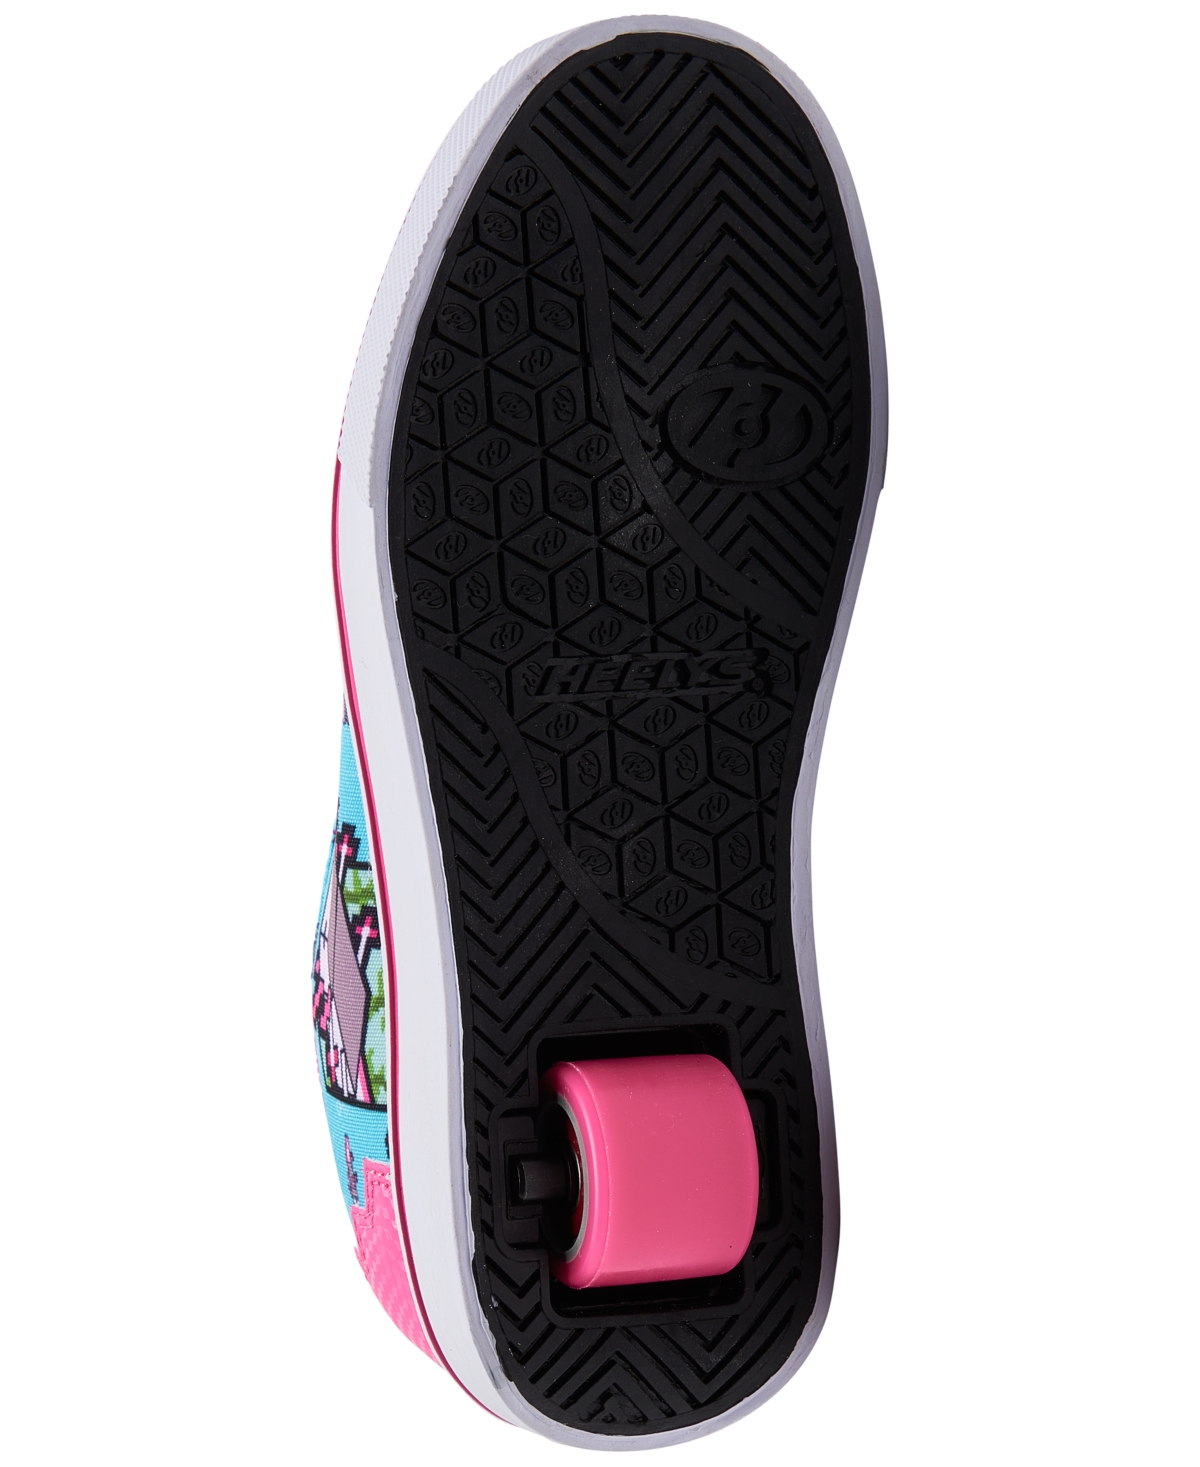 Shop Heelys Little Girls Minecraft Pro 20 Wheeled Skate Casual Sneakers From Finish Line In Aqua,pink,white